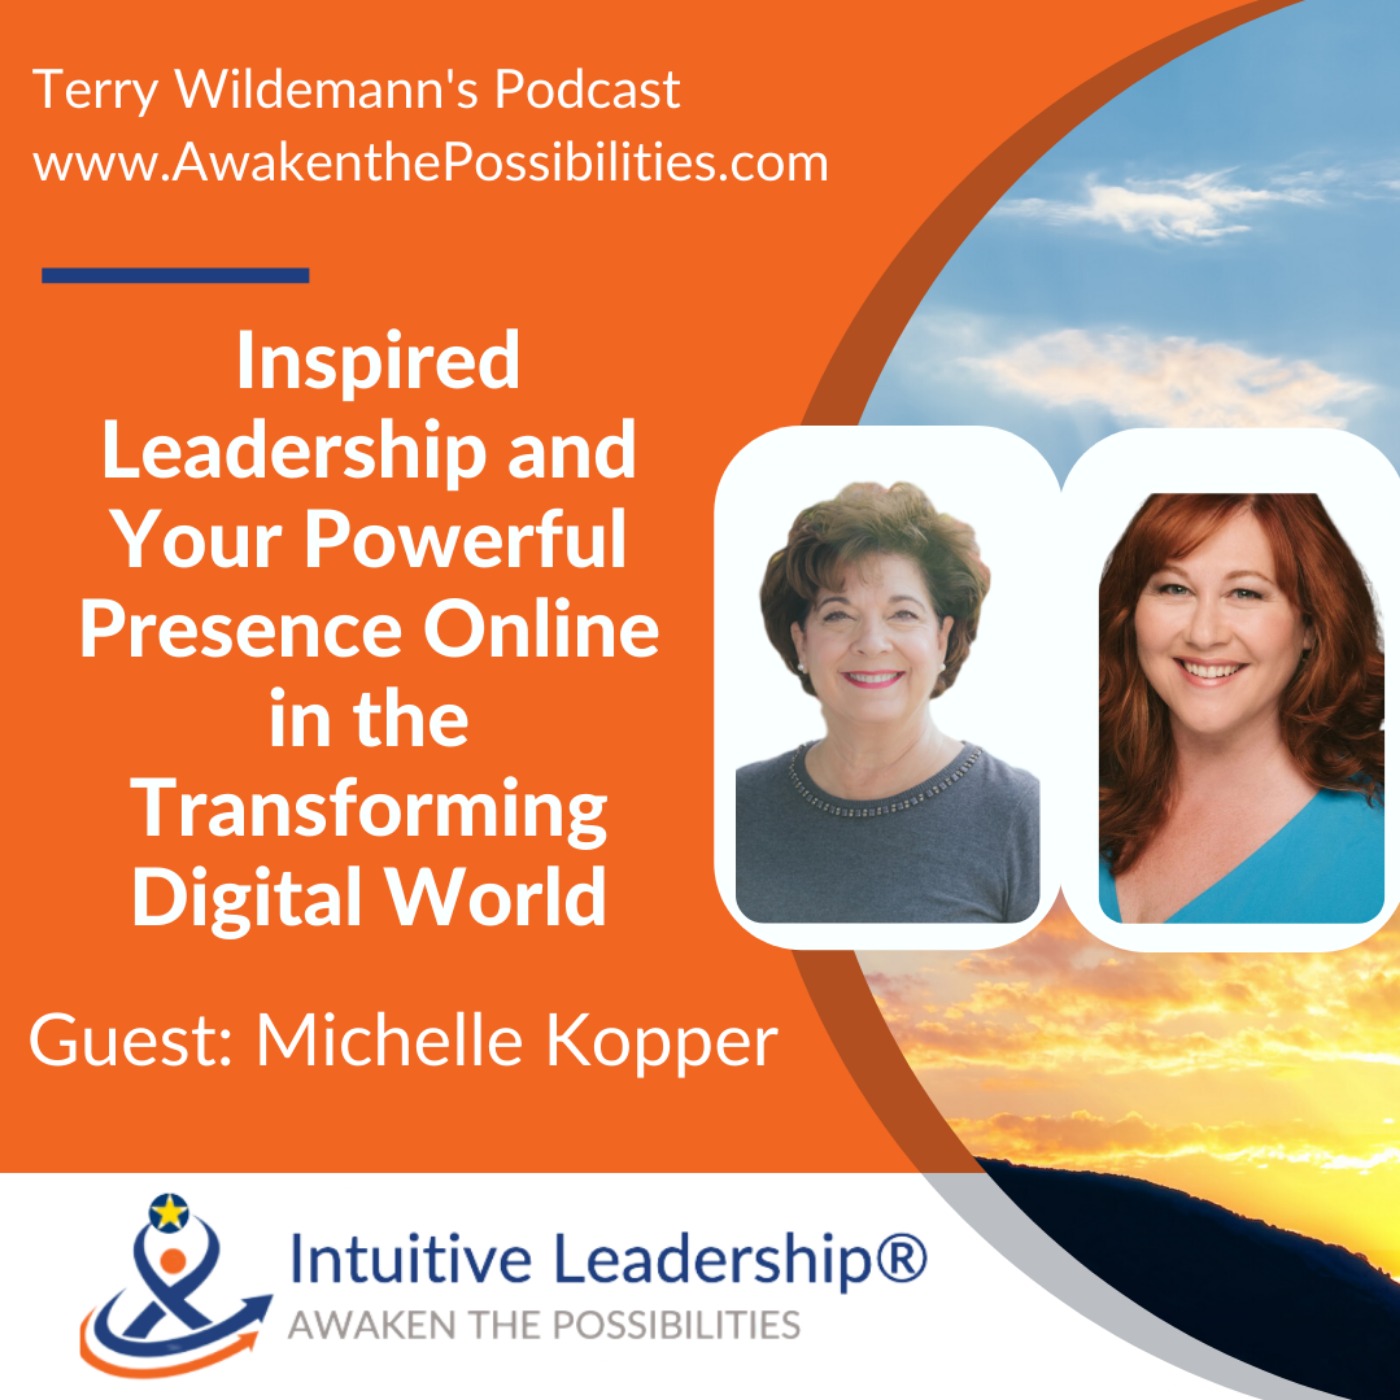 Inspired Leadership and Your Powerful Presence Online in the Transforming Digital World